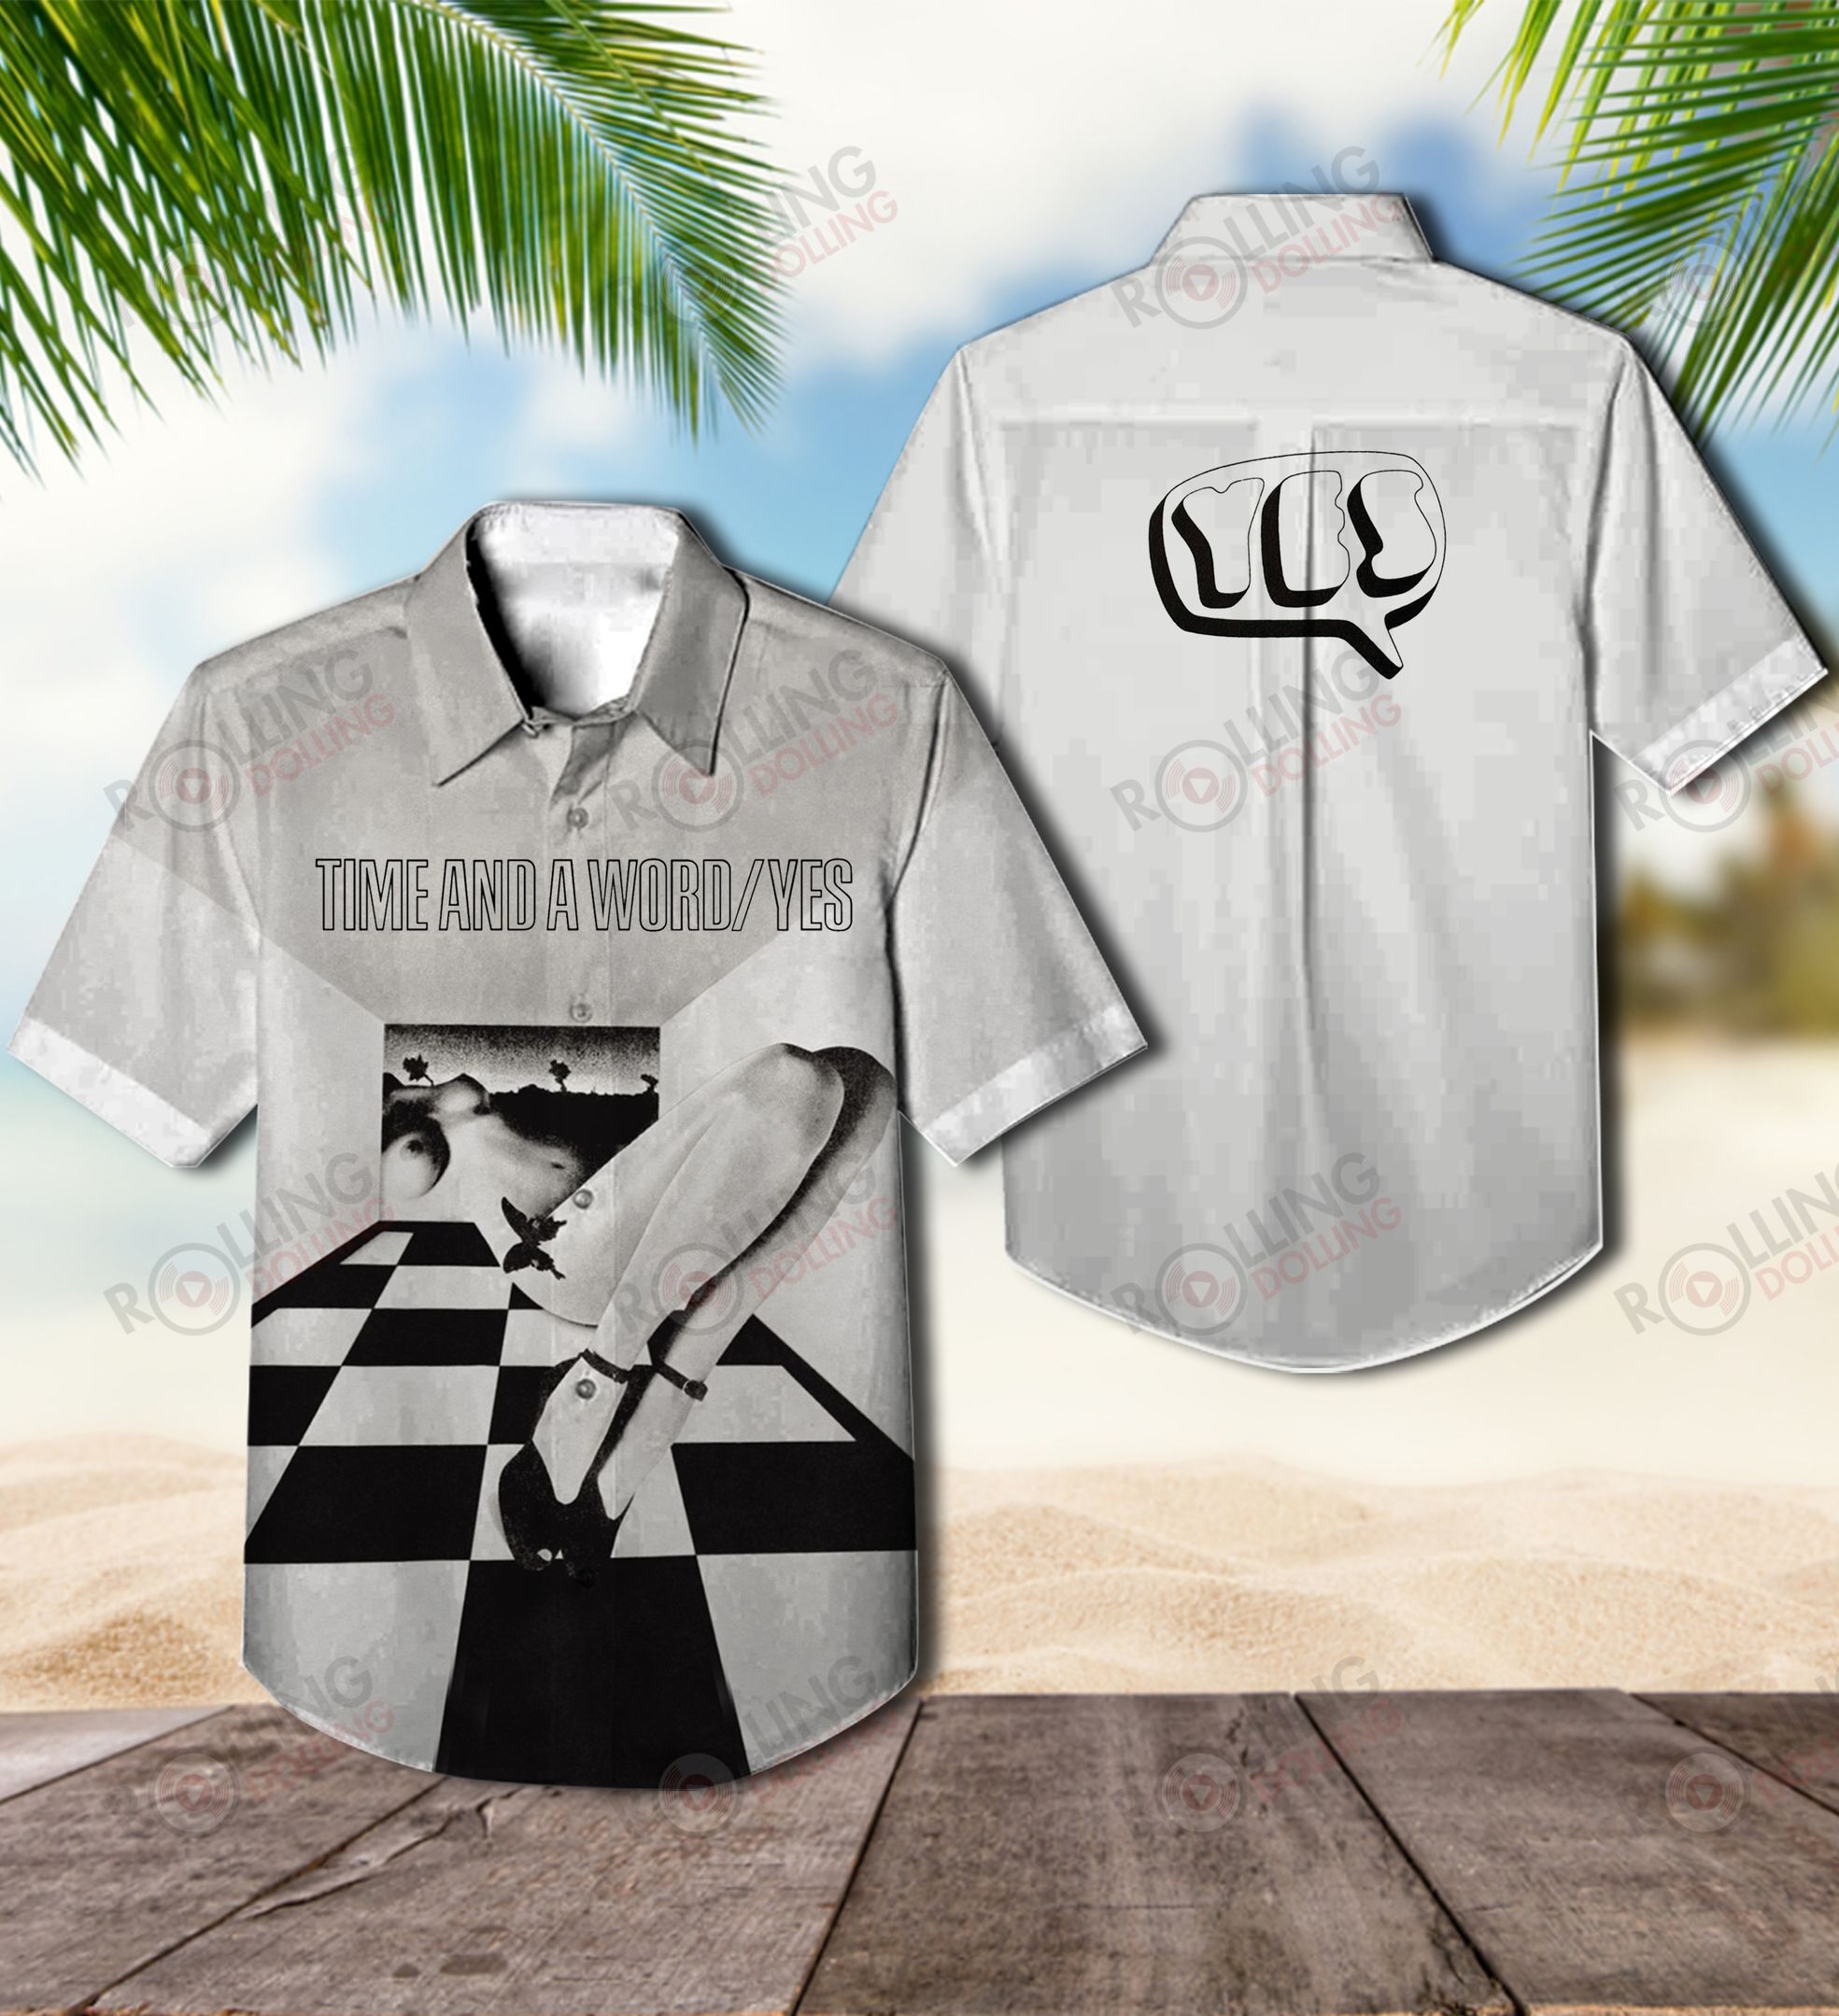 Now you can show off your love of all things band with this Hawaiian Shirt 109